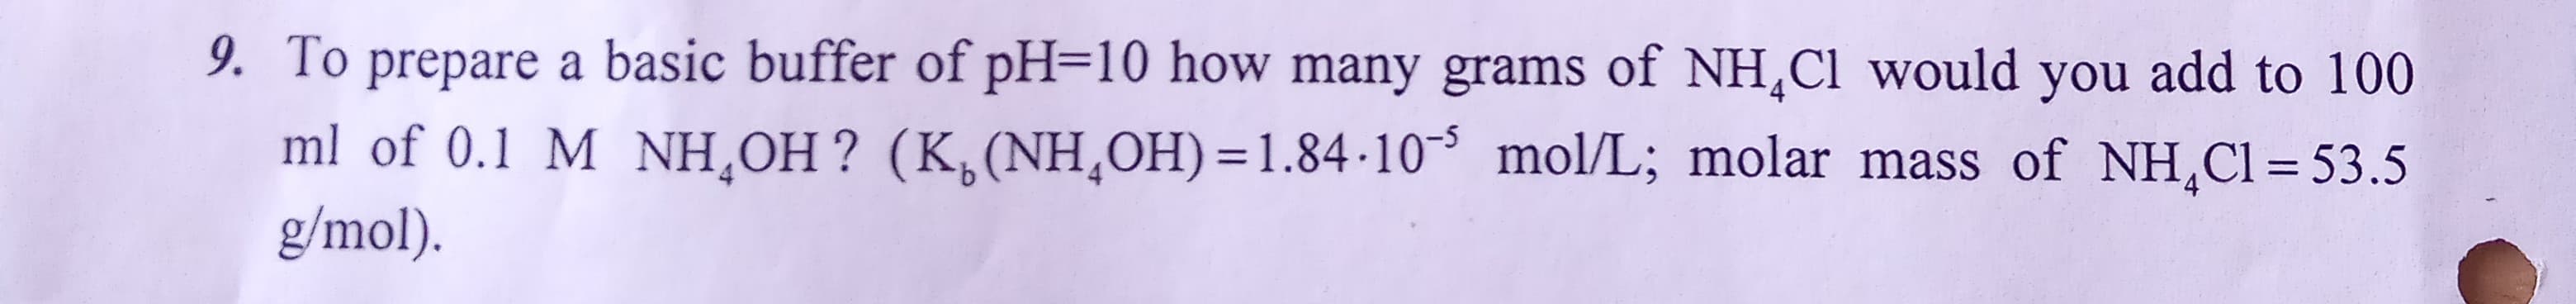 9. To prepare a basic buffer of pH=10 how many grams of NH,Cl would you add to 100
ml of 0.1 M NH¸OH ? (K,(NH,OH) =1.84-10³ mol/L; molar mass of NH,Cl = 53.5
g/mol).
%3D
